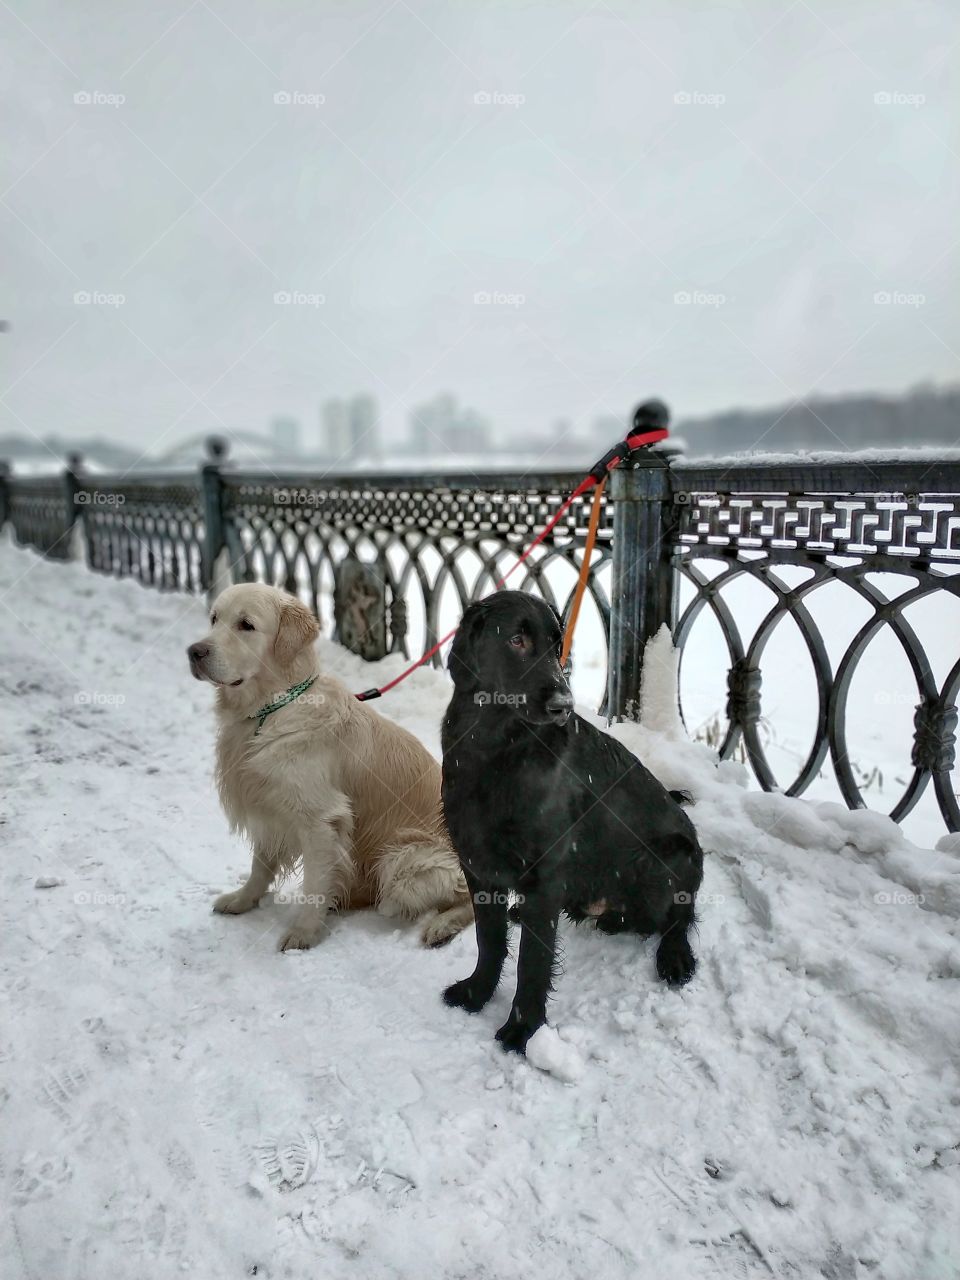 Dogs on the snow.